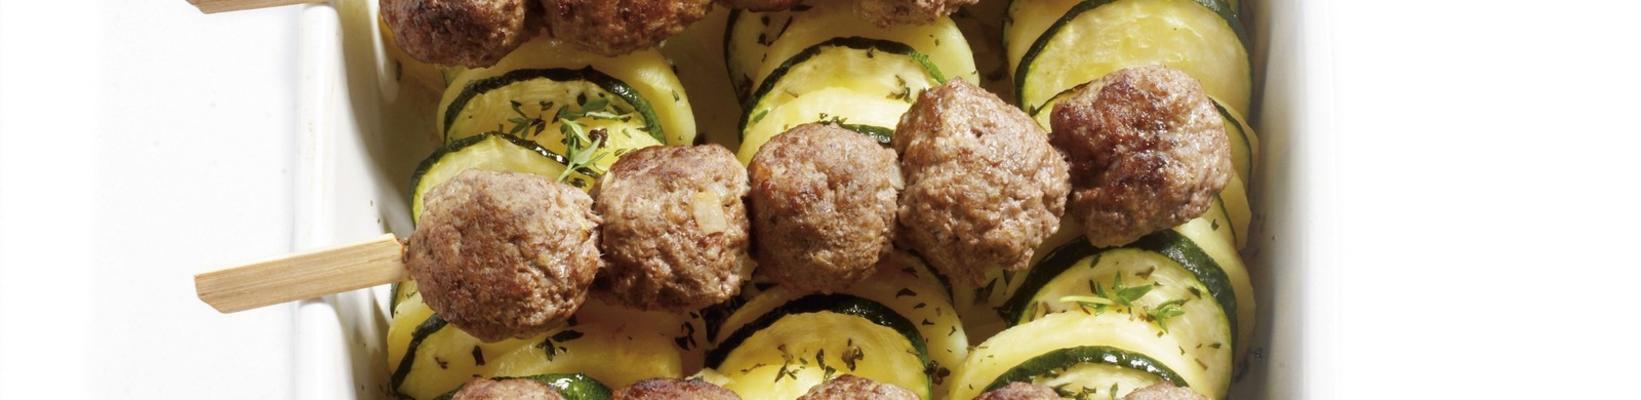 potato courgette dish with meat skewers